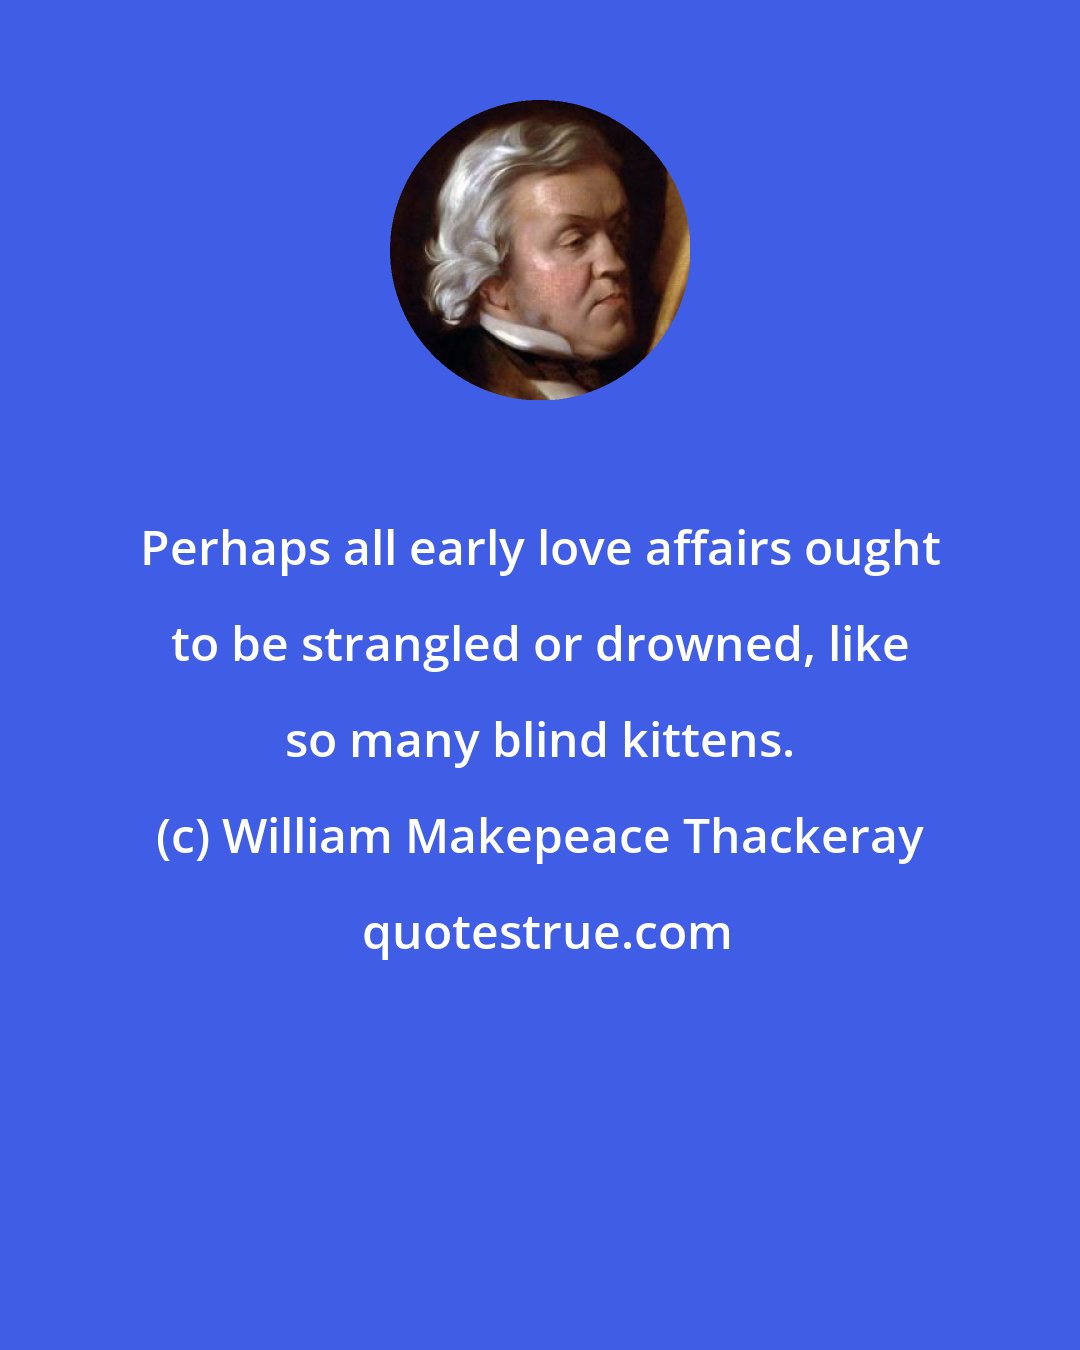 William Makepeace Thackeray: Perhaps all early love affairs ought to be strangled or drowned, like so many blind kittens.